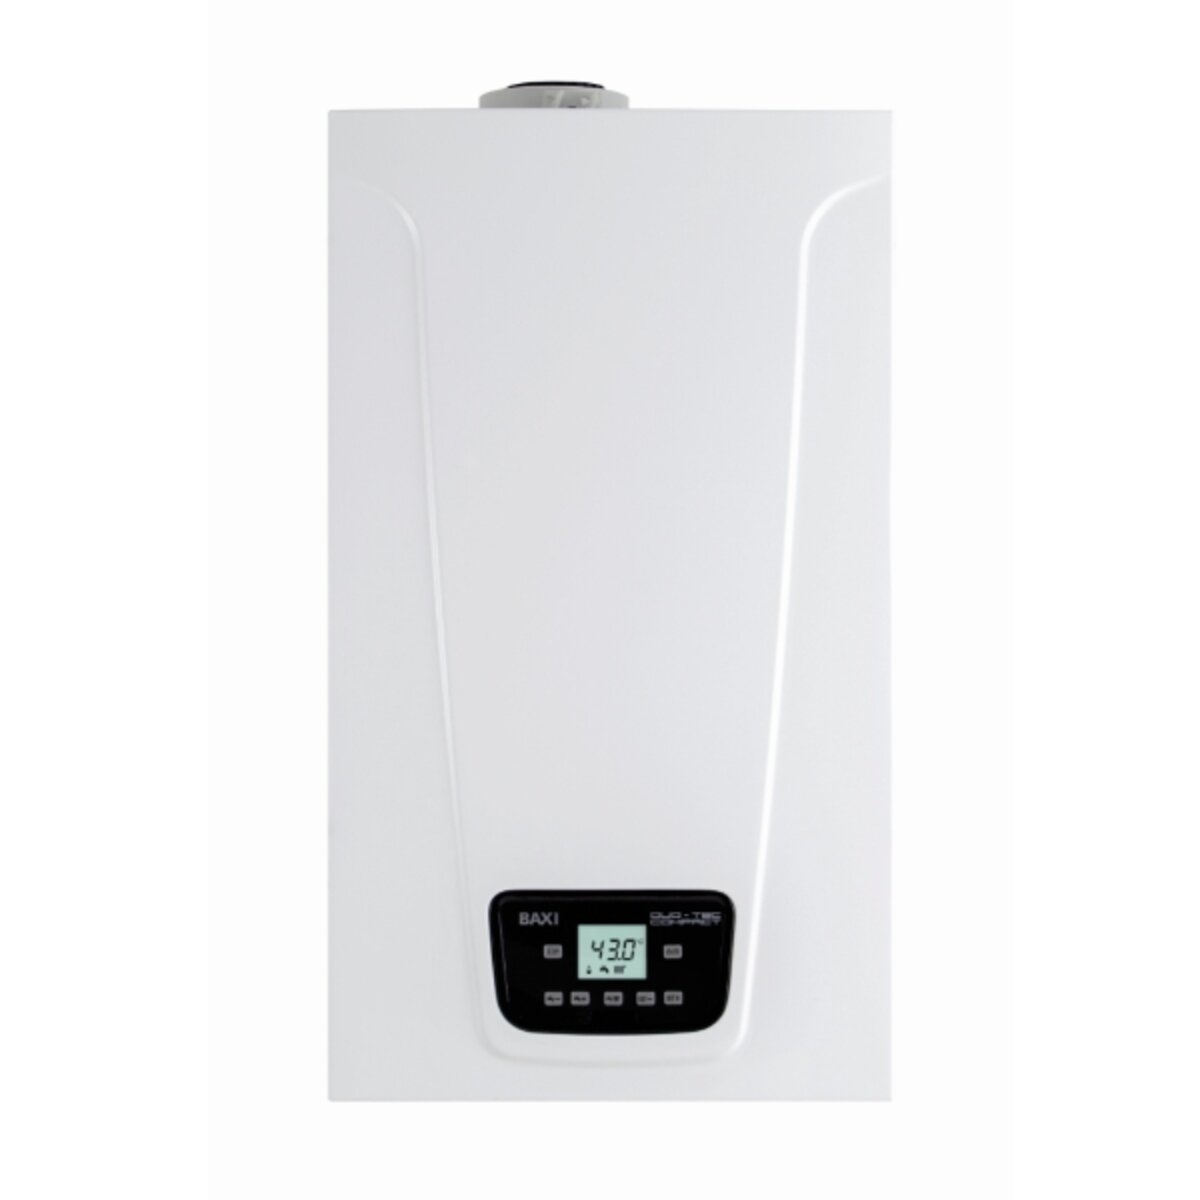 Wall-mounted boiler Baxi duo-tec compact e 24 with condensation sealed chamber 20 kW methane